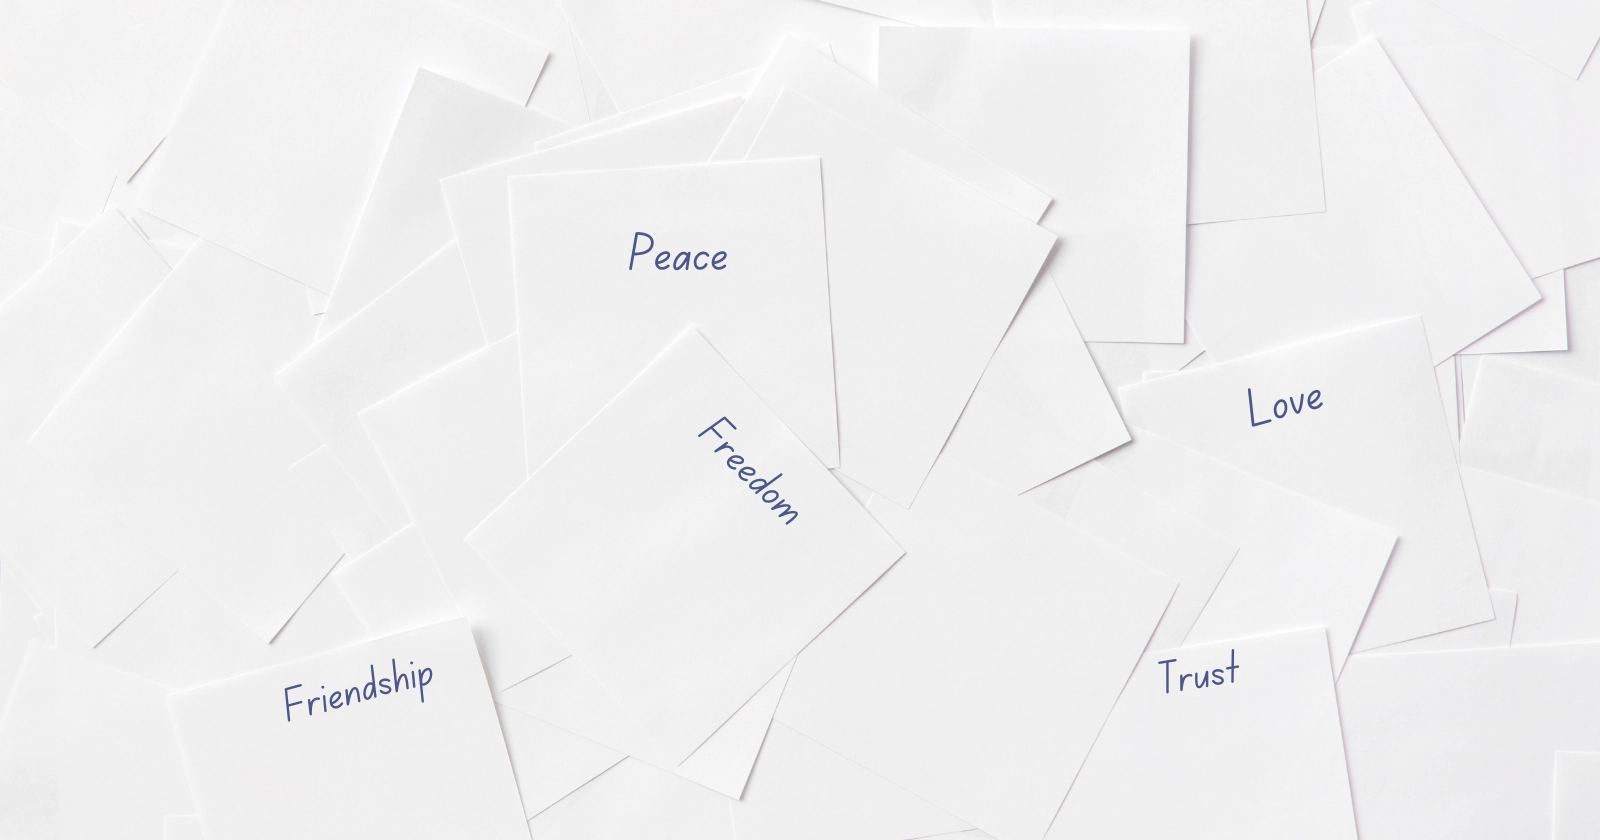 Banquet Thank You Notes: What to Write and How to Write Them